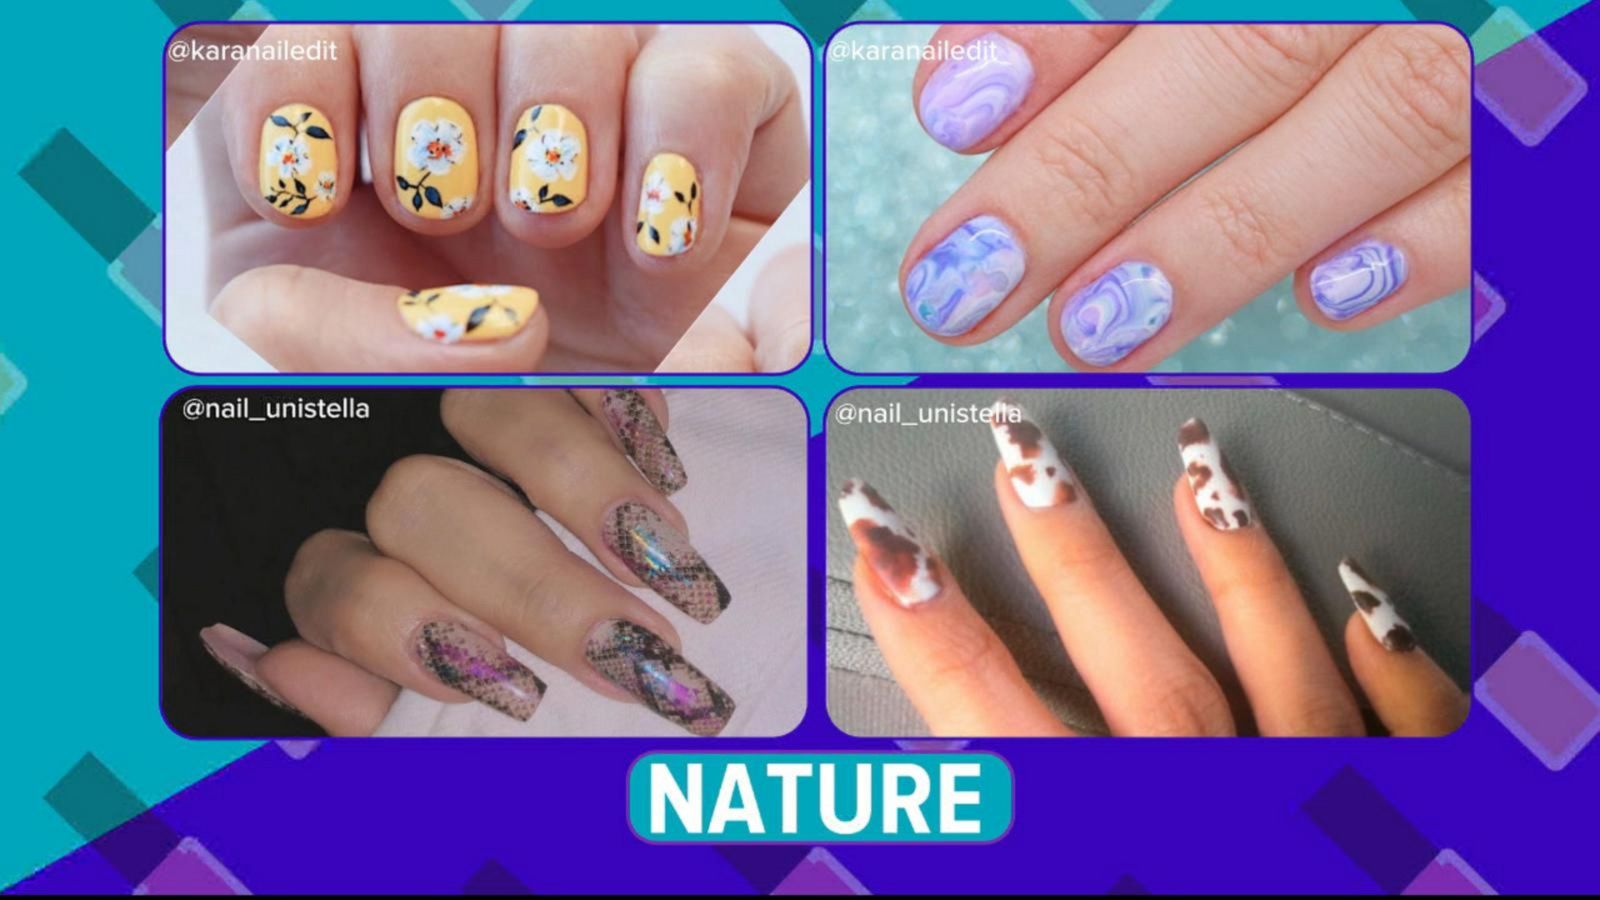 5. "Nailed It or Failed It" Nail Art Trends on Twitter - wide 3